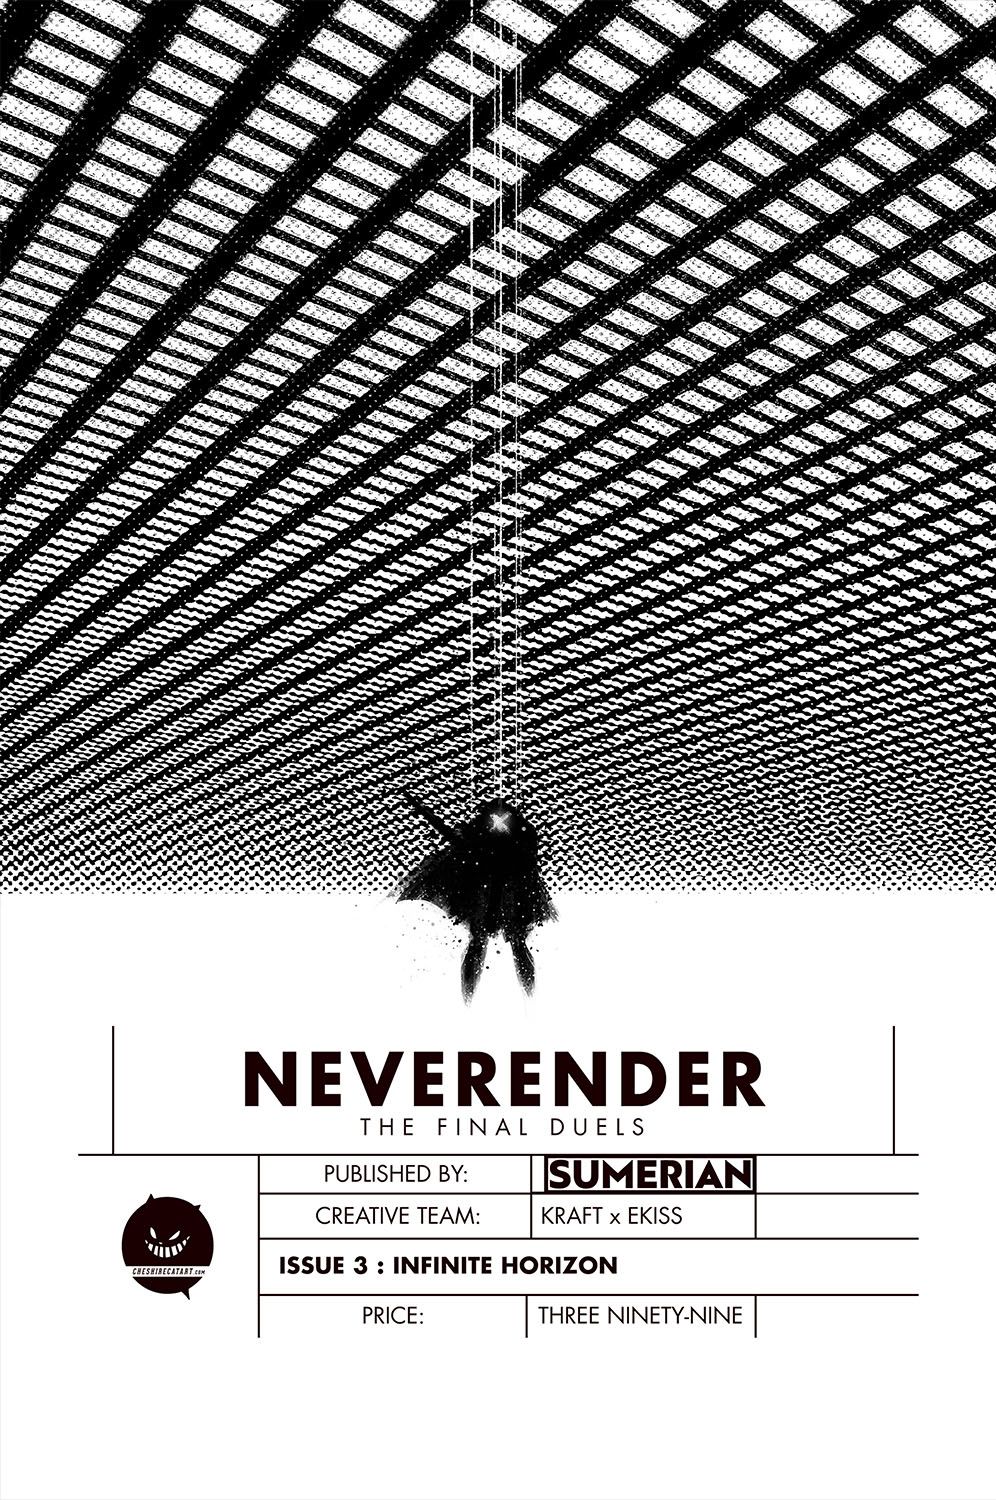 Neverender: The Final Duels #3 Comic